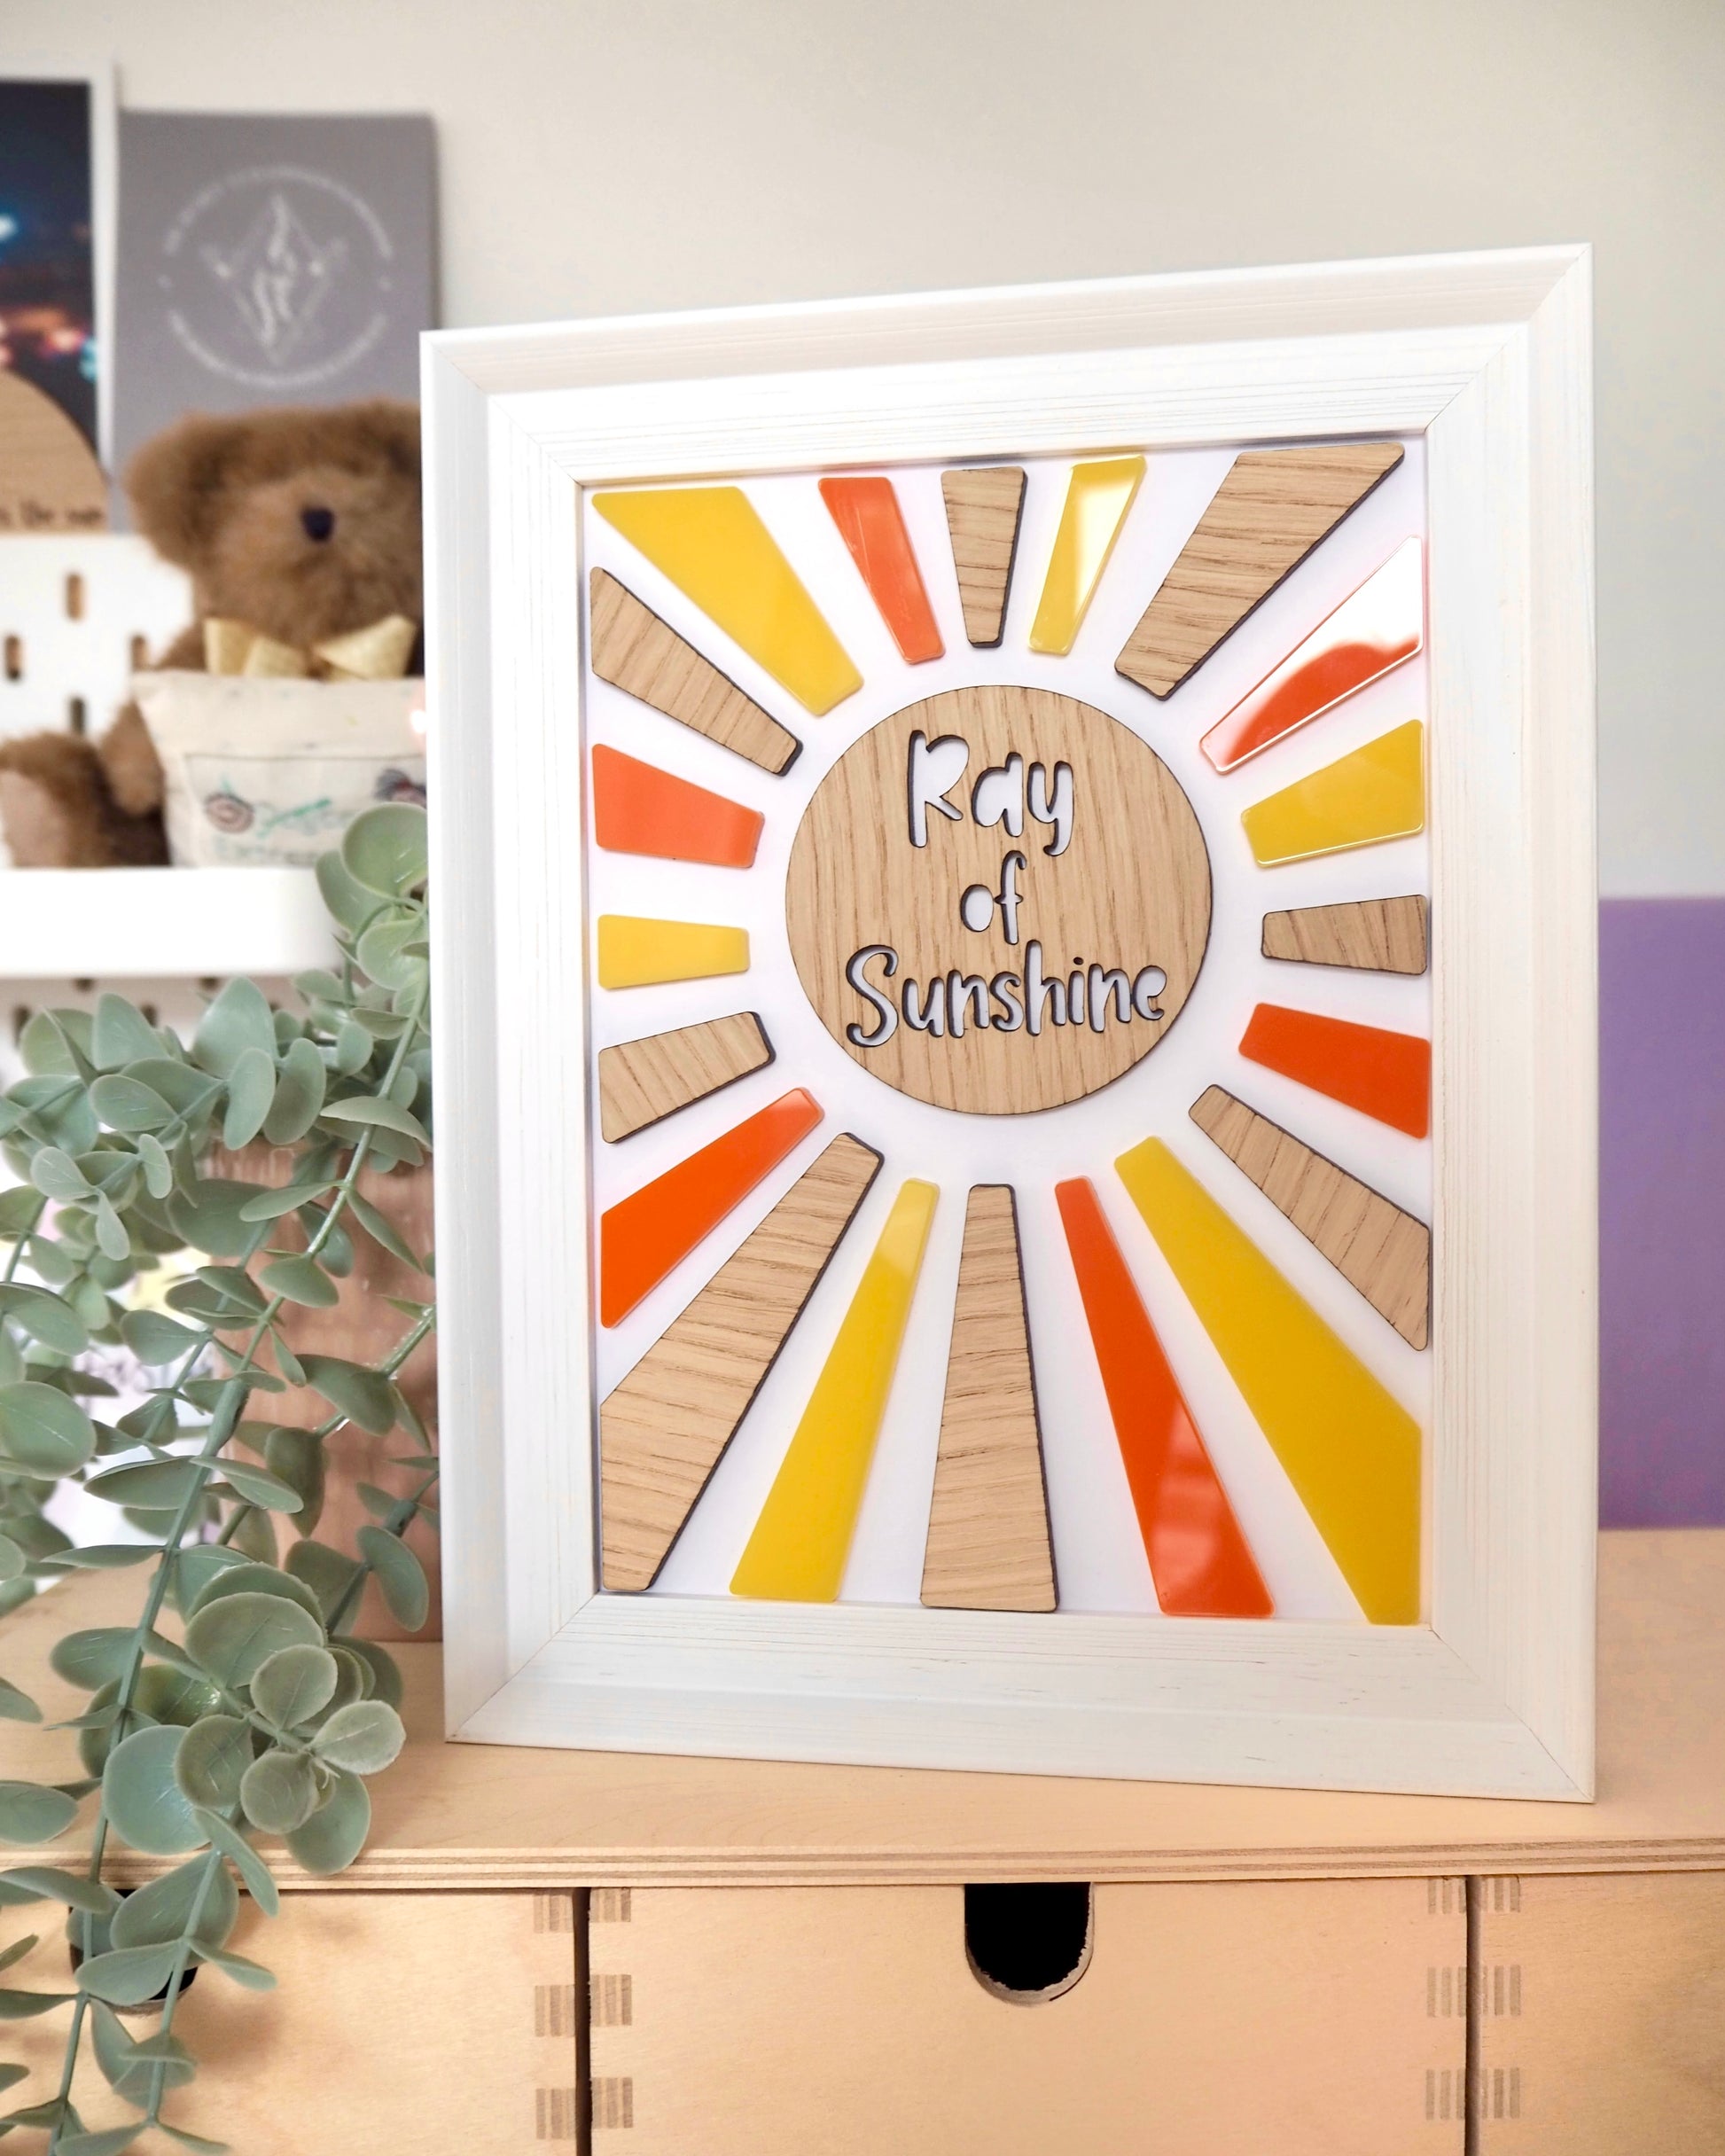 Sunshine made from wood and yellow and orange acrylic for the rays, mounted in a white wooden frame. The words Ray of Sunshine cut out from the middle of the sunshine